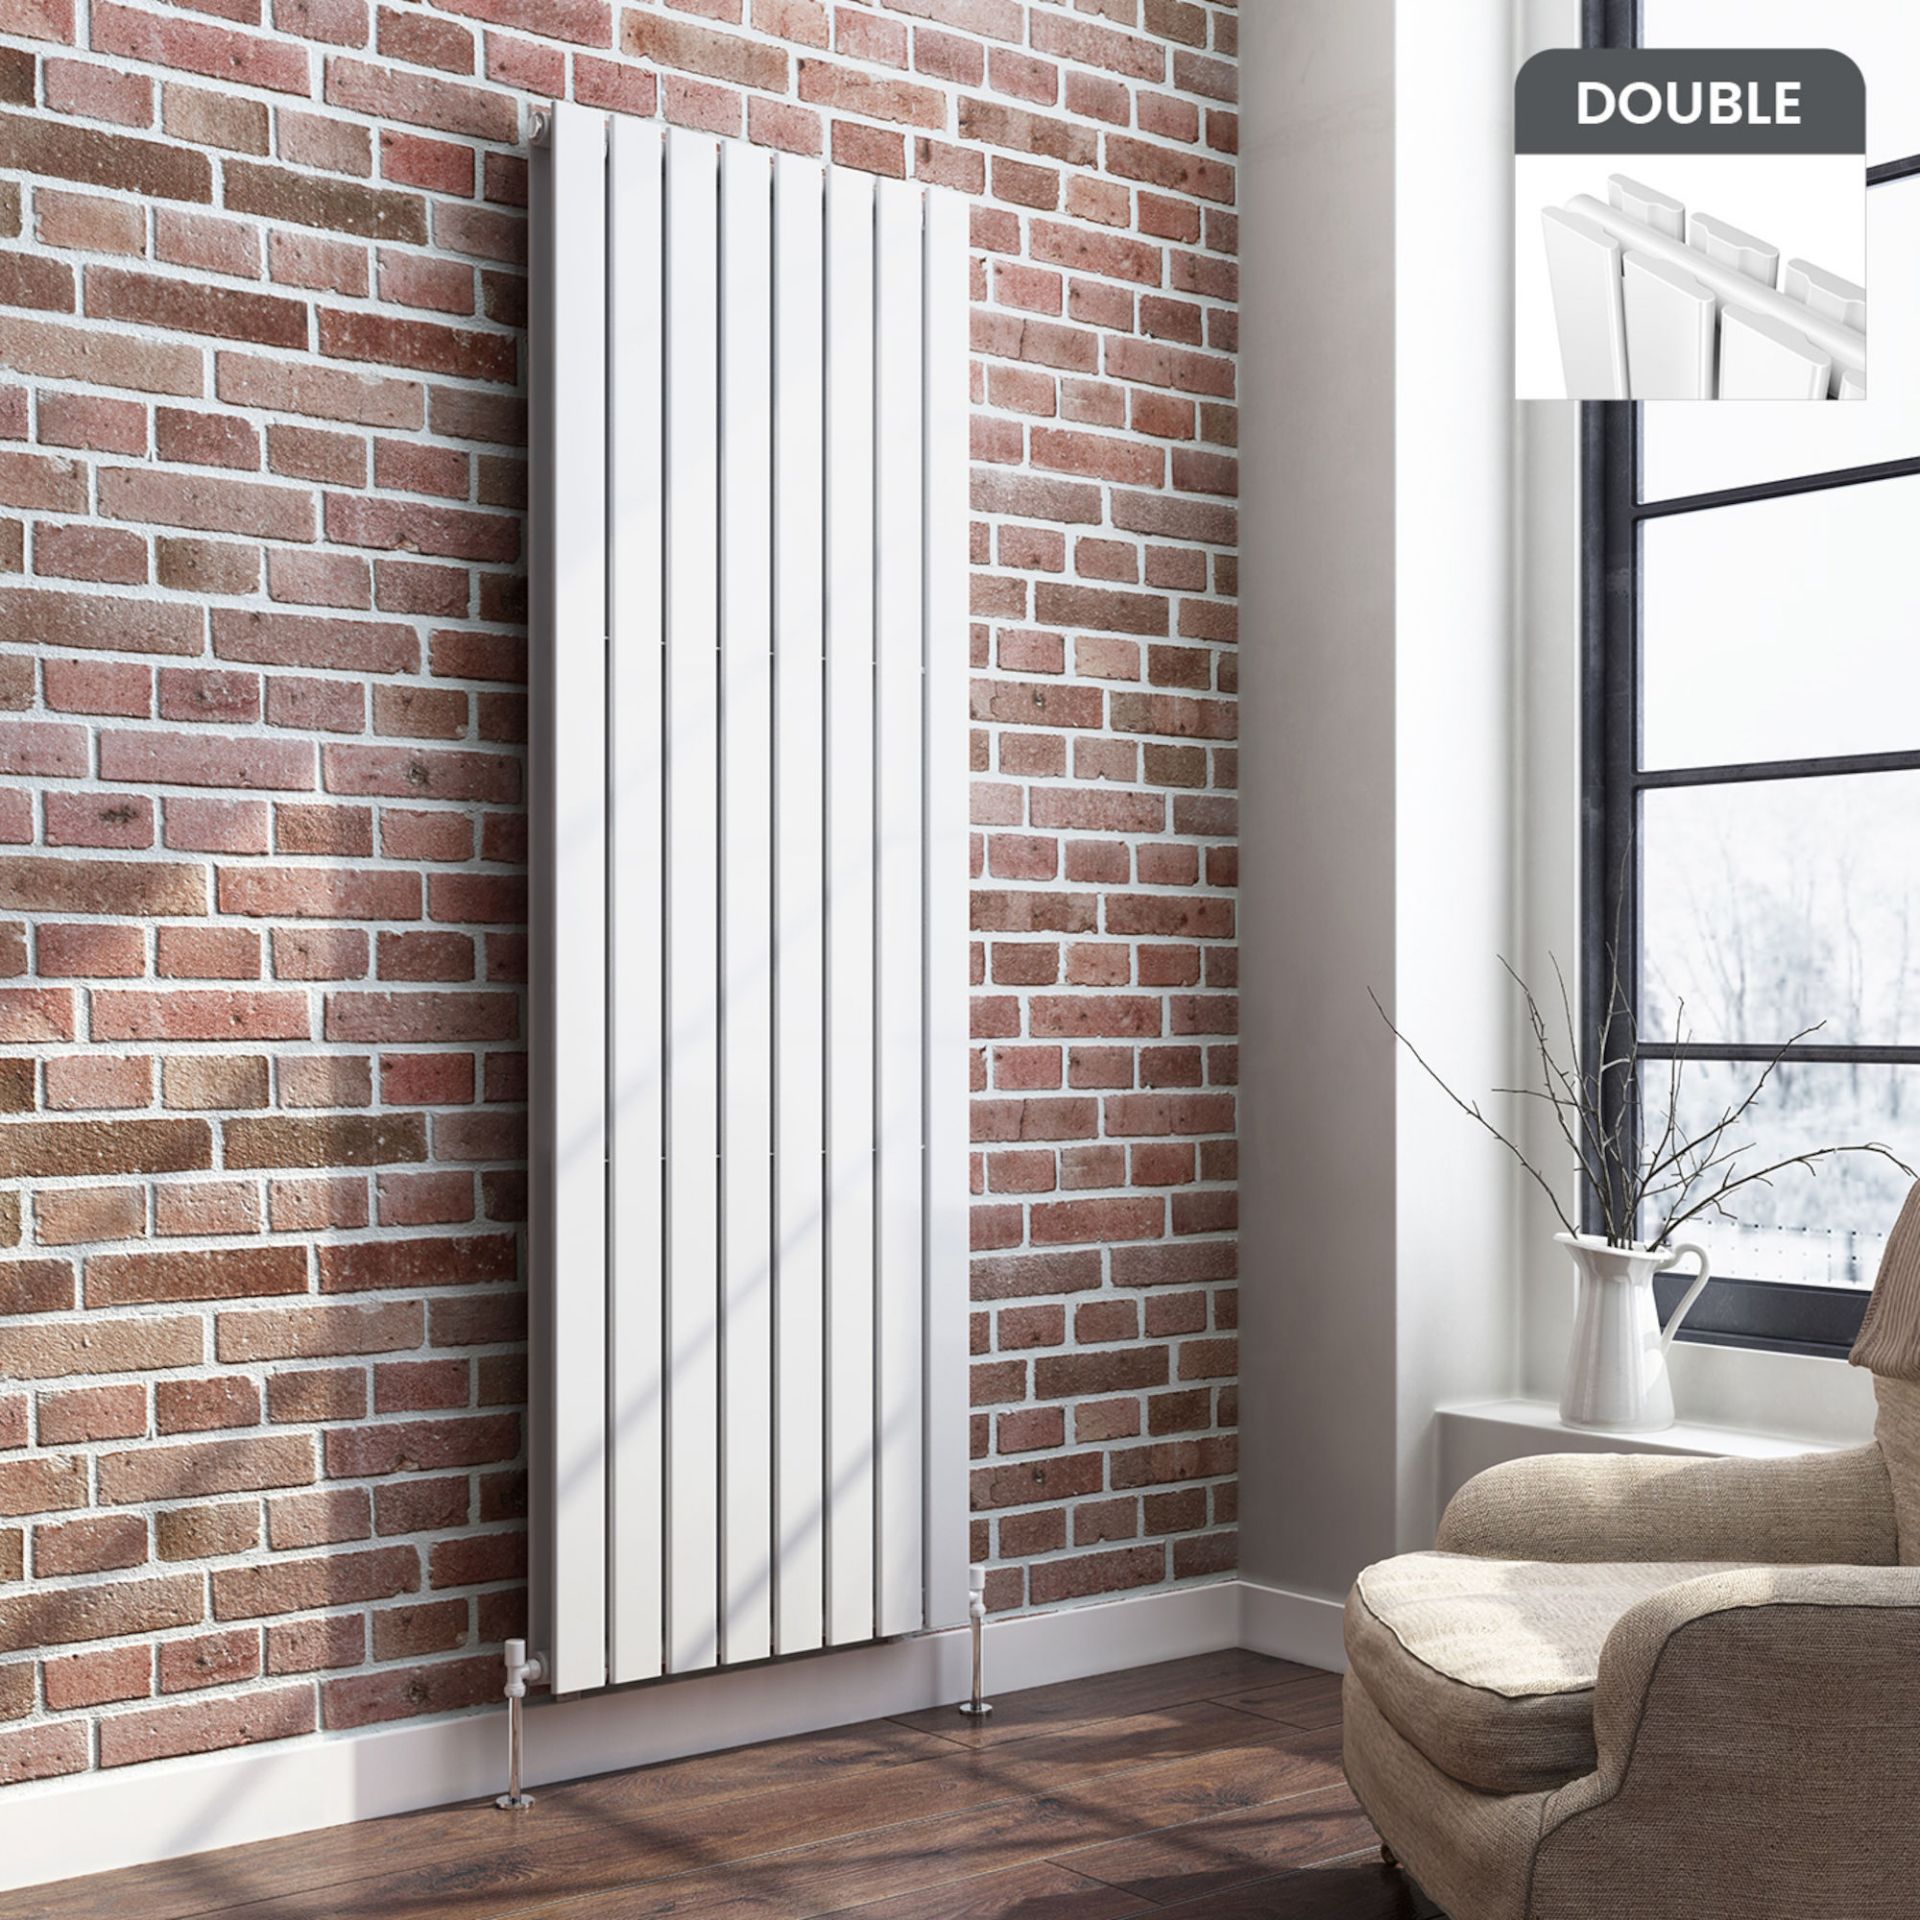 (MT210) 1800x608mm Gloss White Double Flat Panel Vertical Radiator - Premium. RRP £499.99. Made from